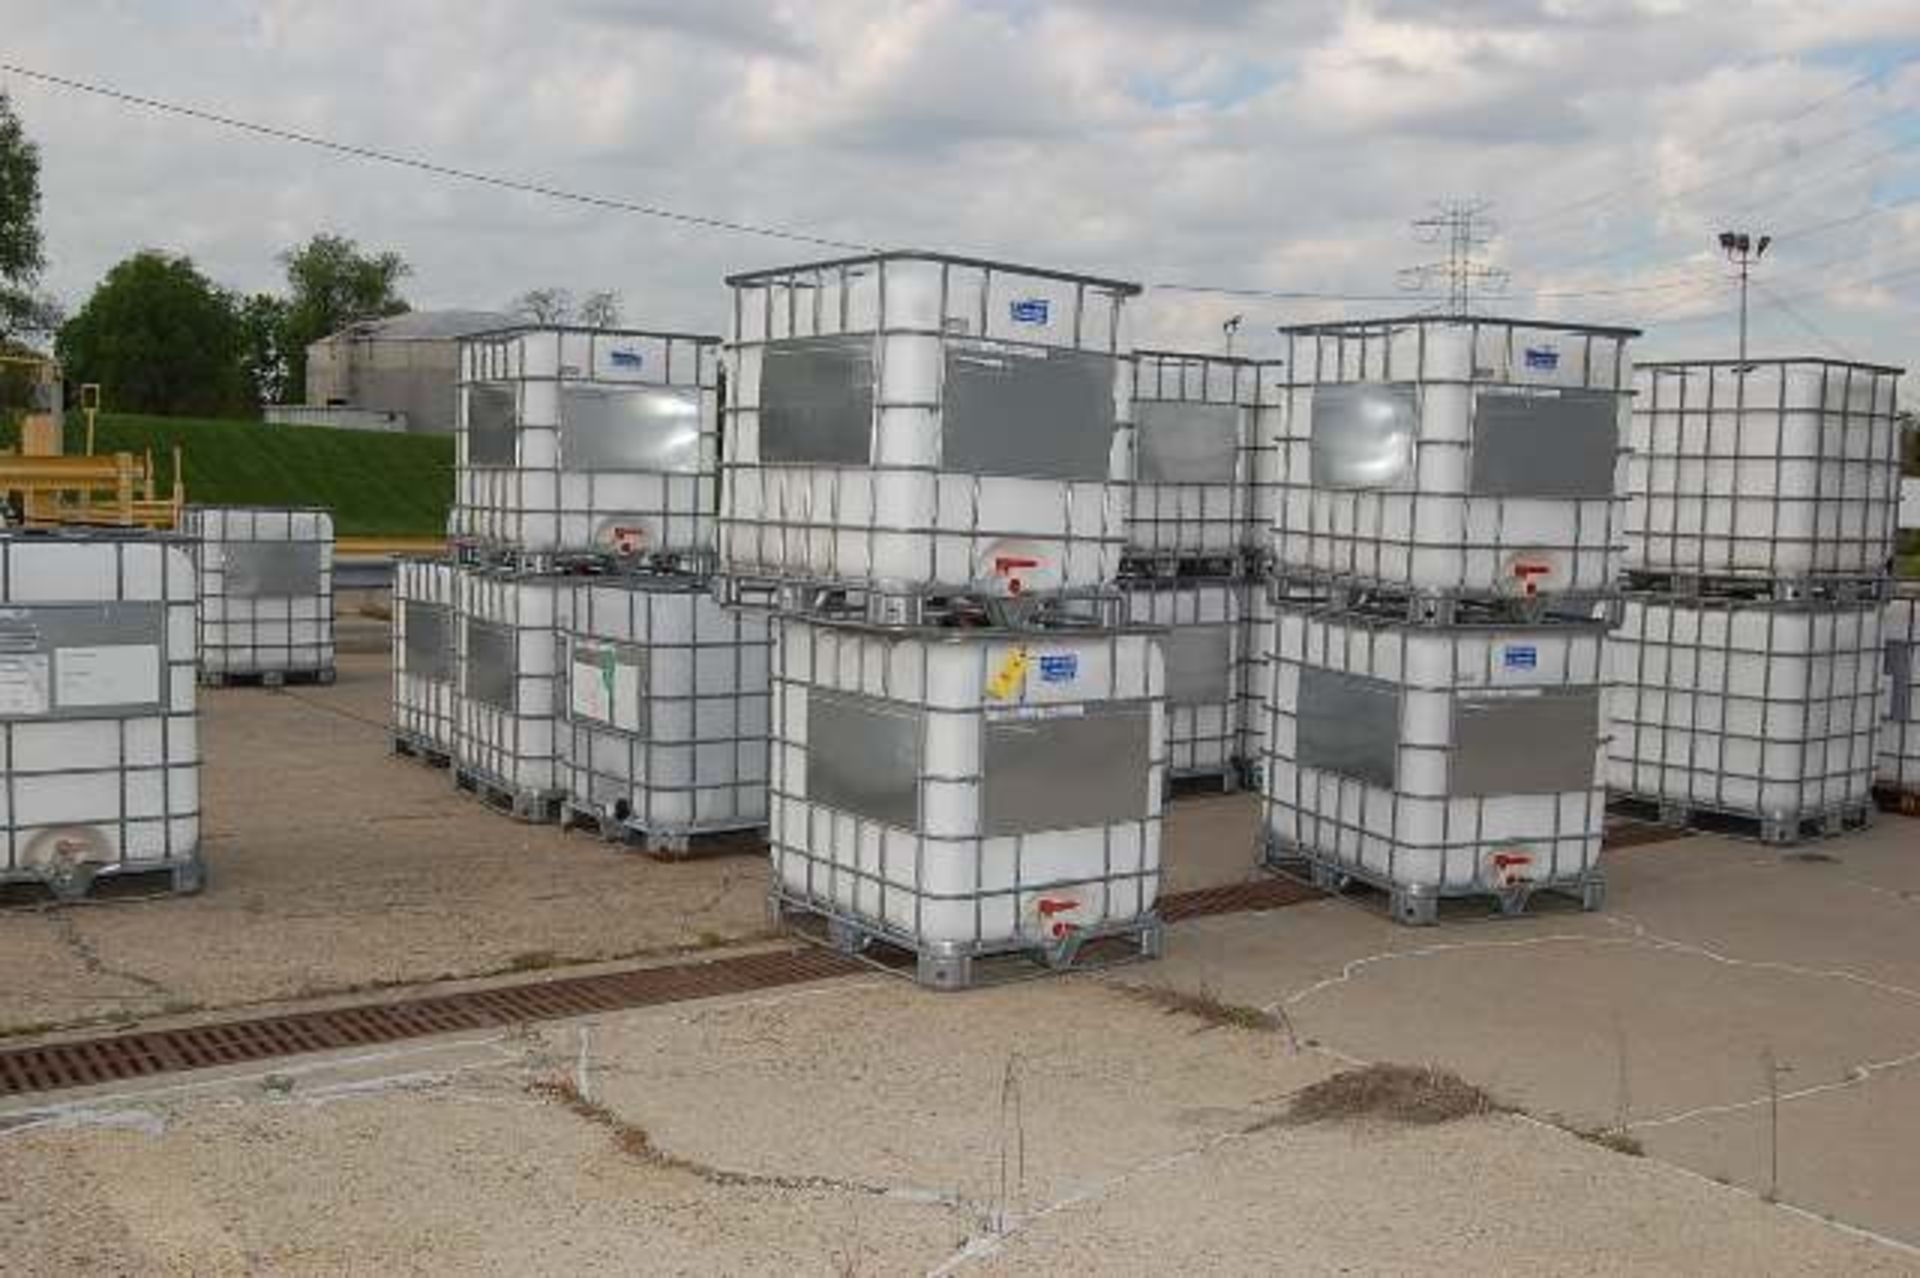 (38) Schutz Aluminum Frame Totes w/ Poly Tank, Transport Rated 1650 Kg Max